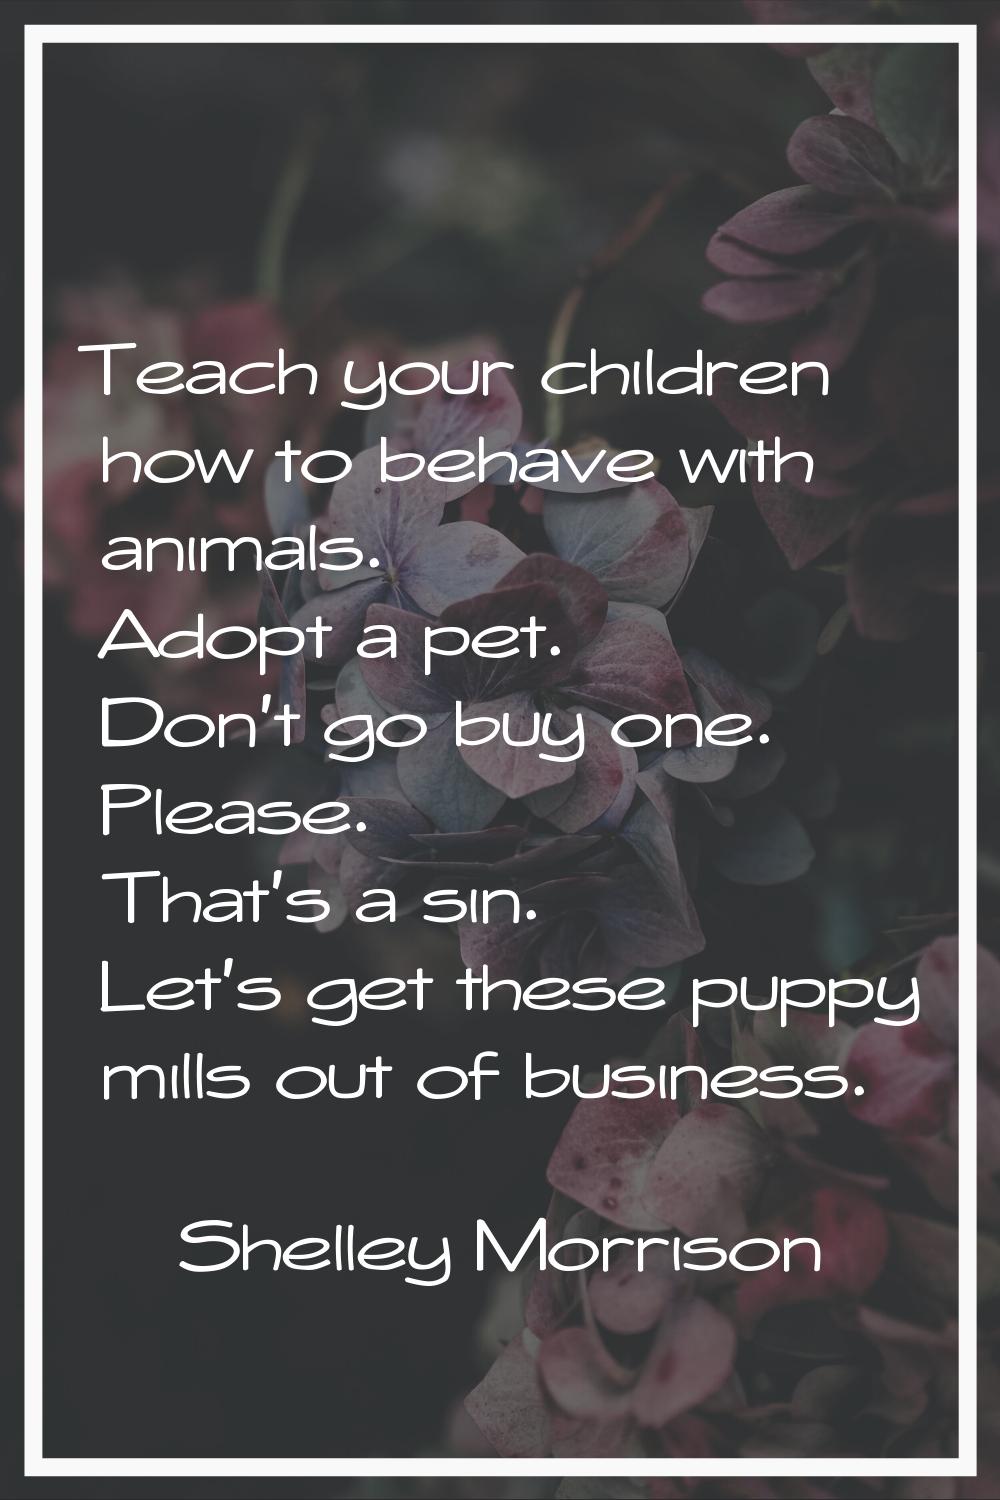 Teach your children how to behave with animals. Adopt a pet. Don't go buy one. Please. That's a sin